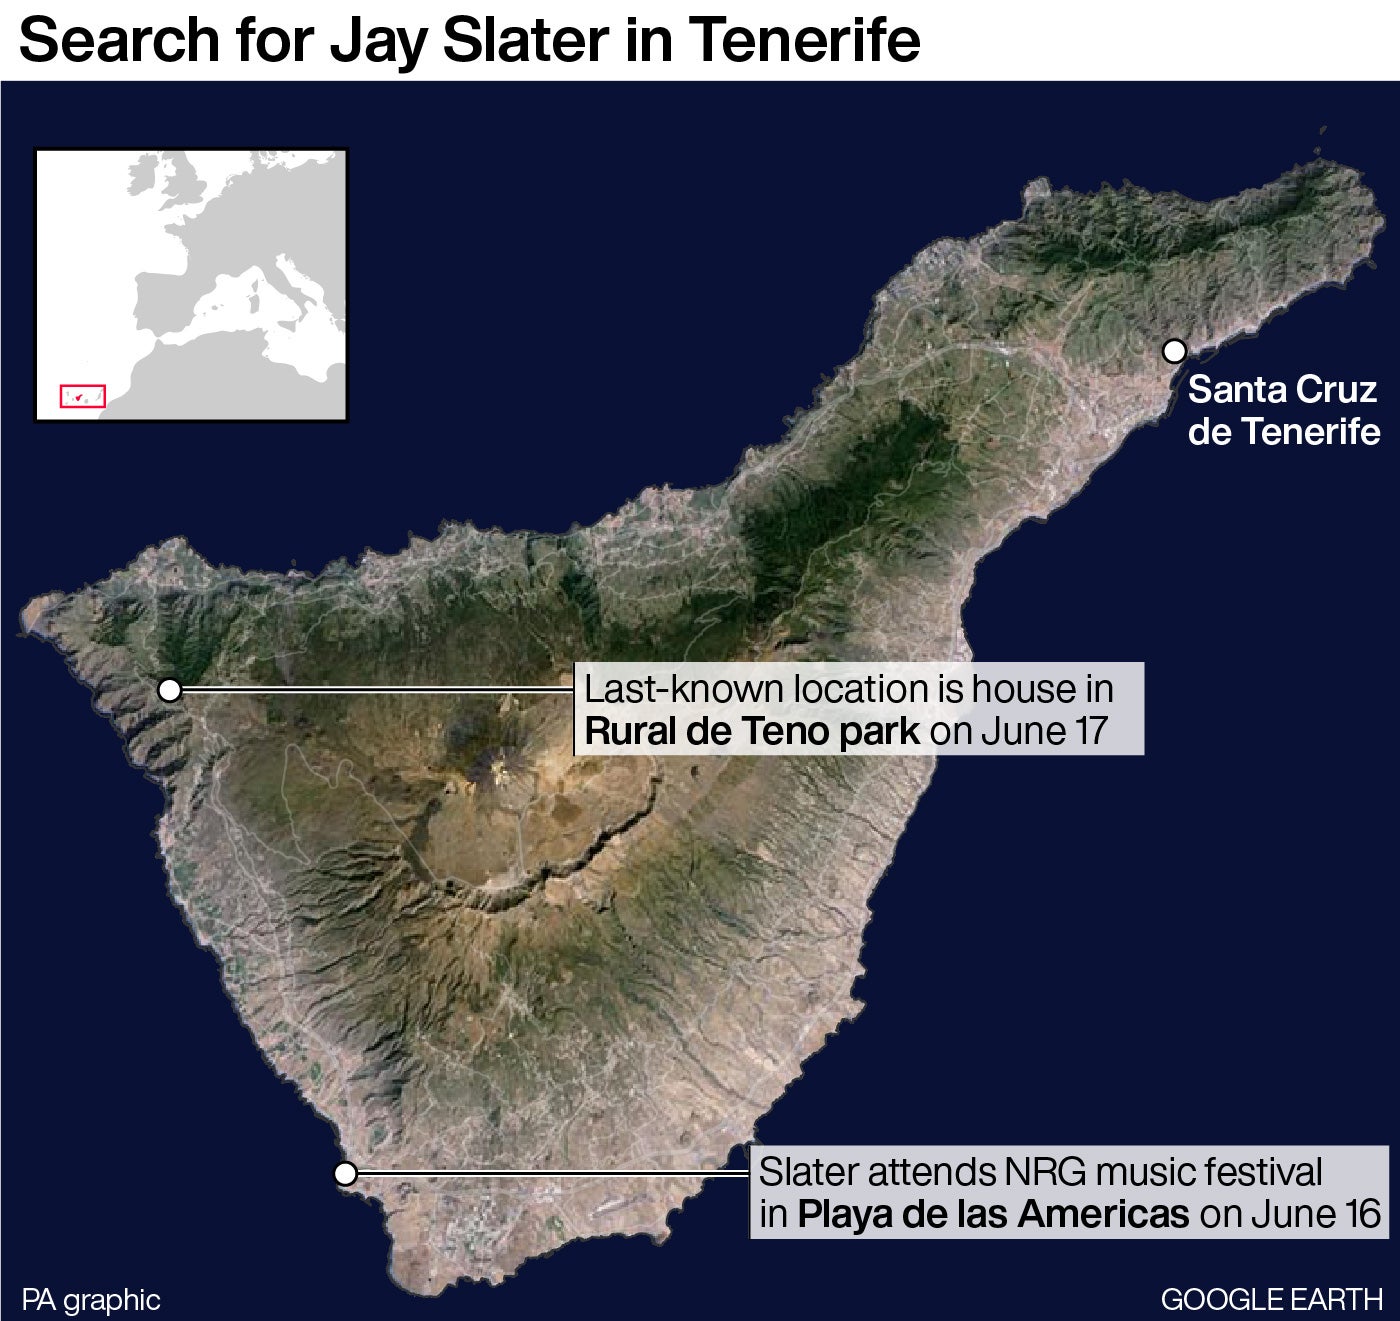 A map of Jay Slater’s last known whereabouts in Tenerife